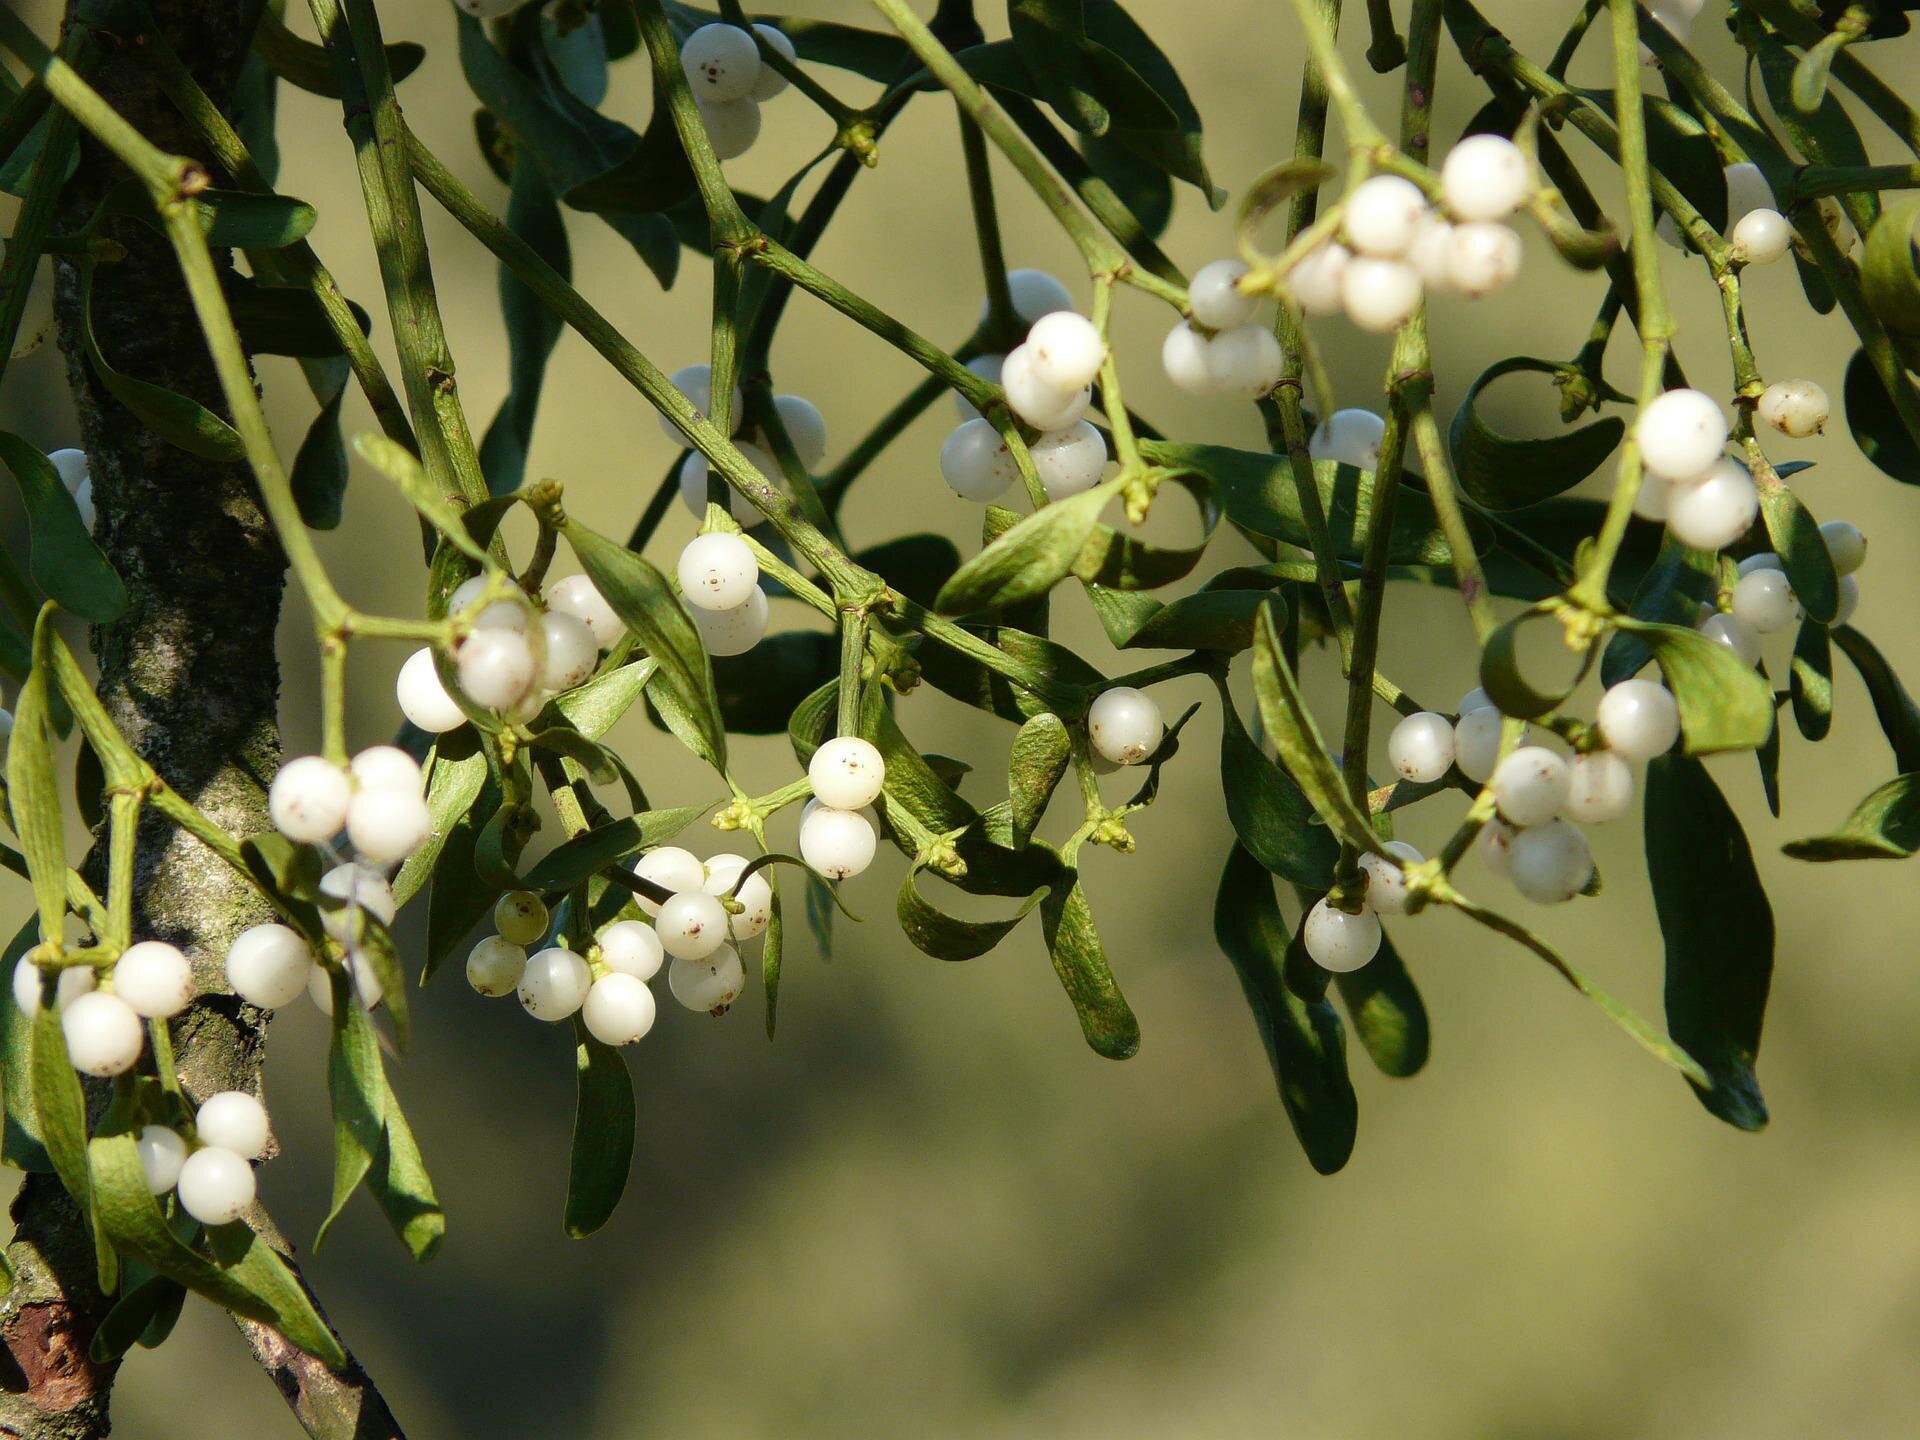 Mistletoe berries may hold the secret for creating a biological super glue